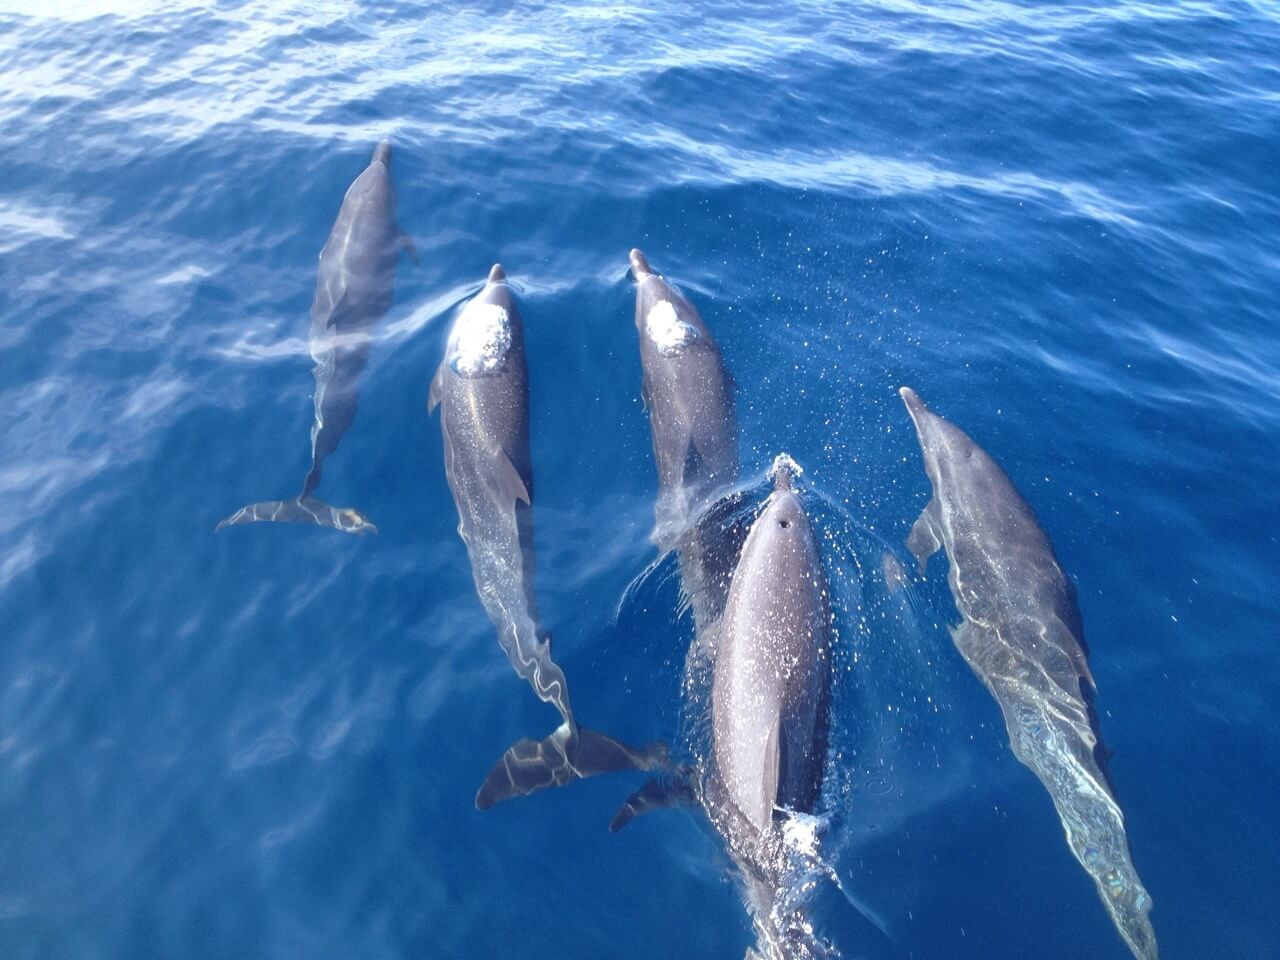 Dolphins swimming at the sea